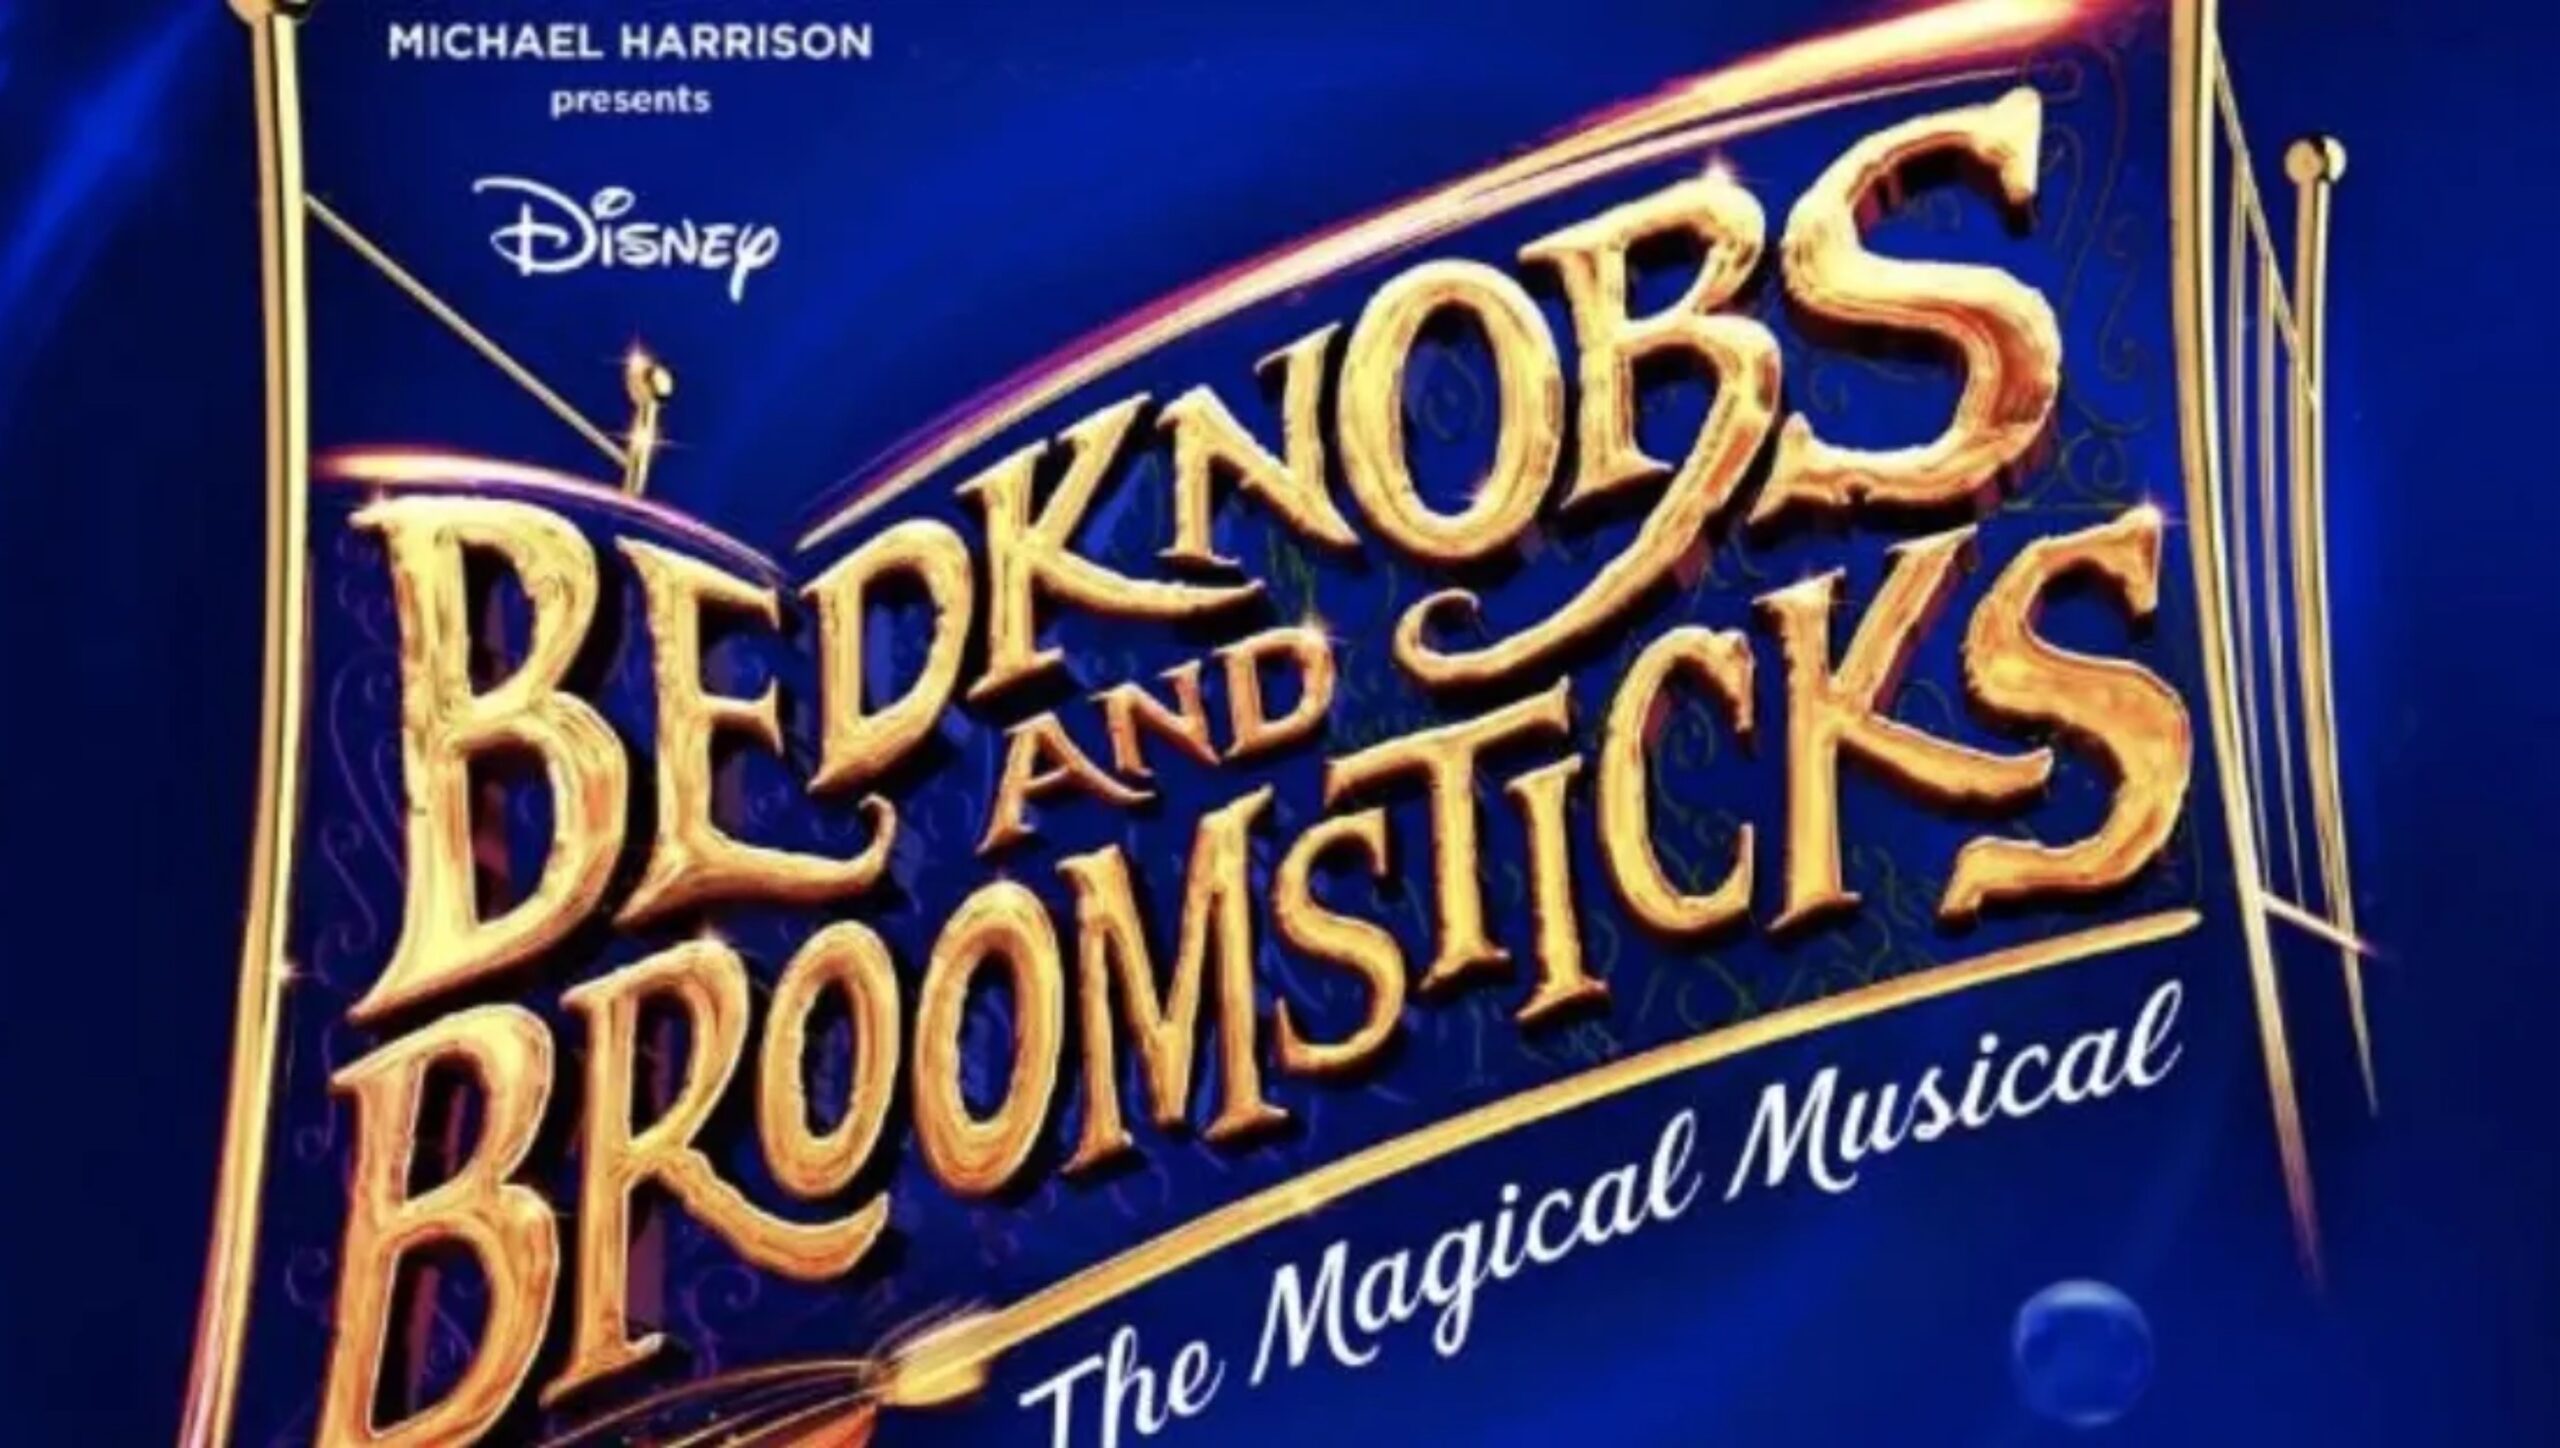 Bedknobs and Broomsticks: the Magical Musical Logo